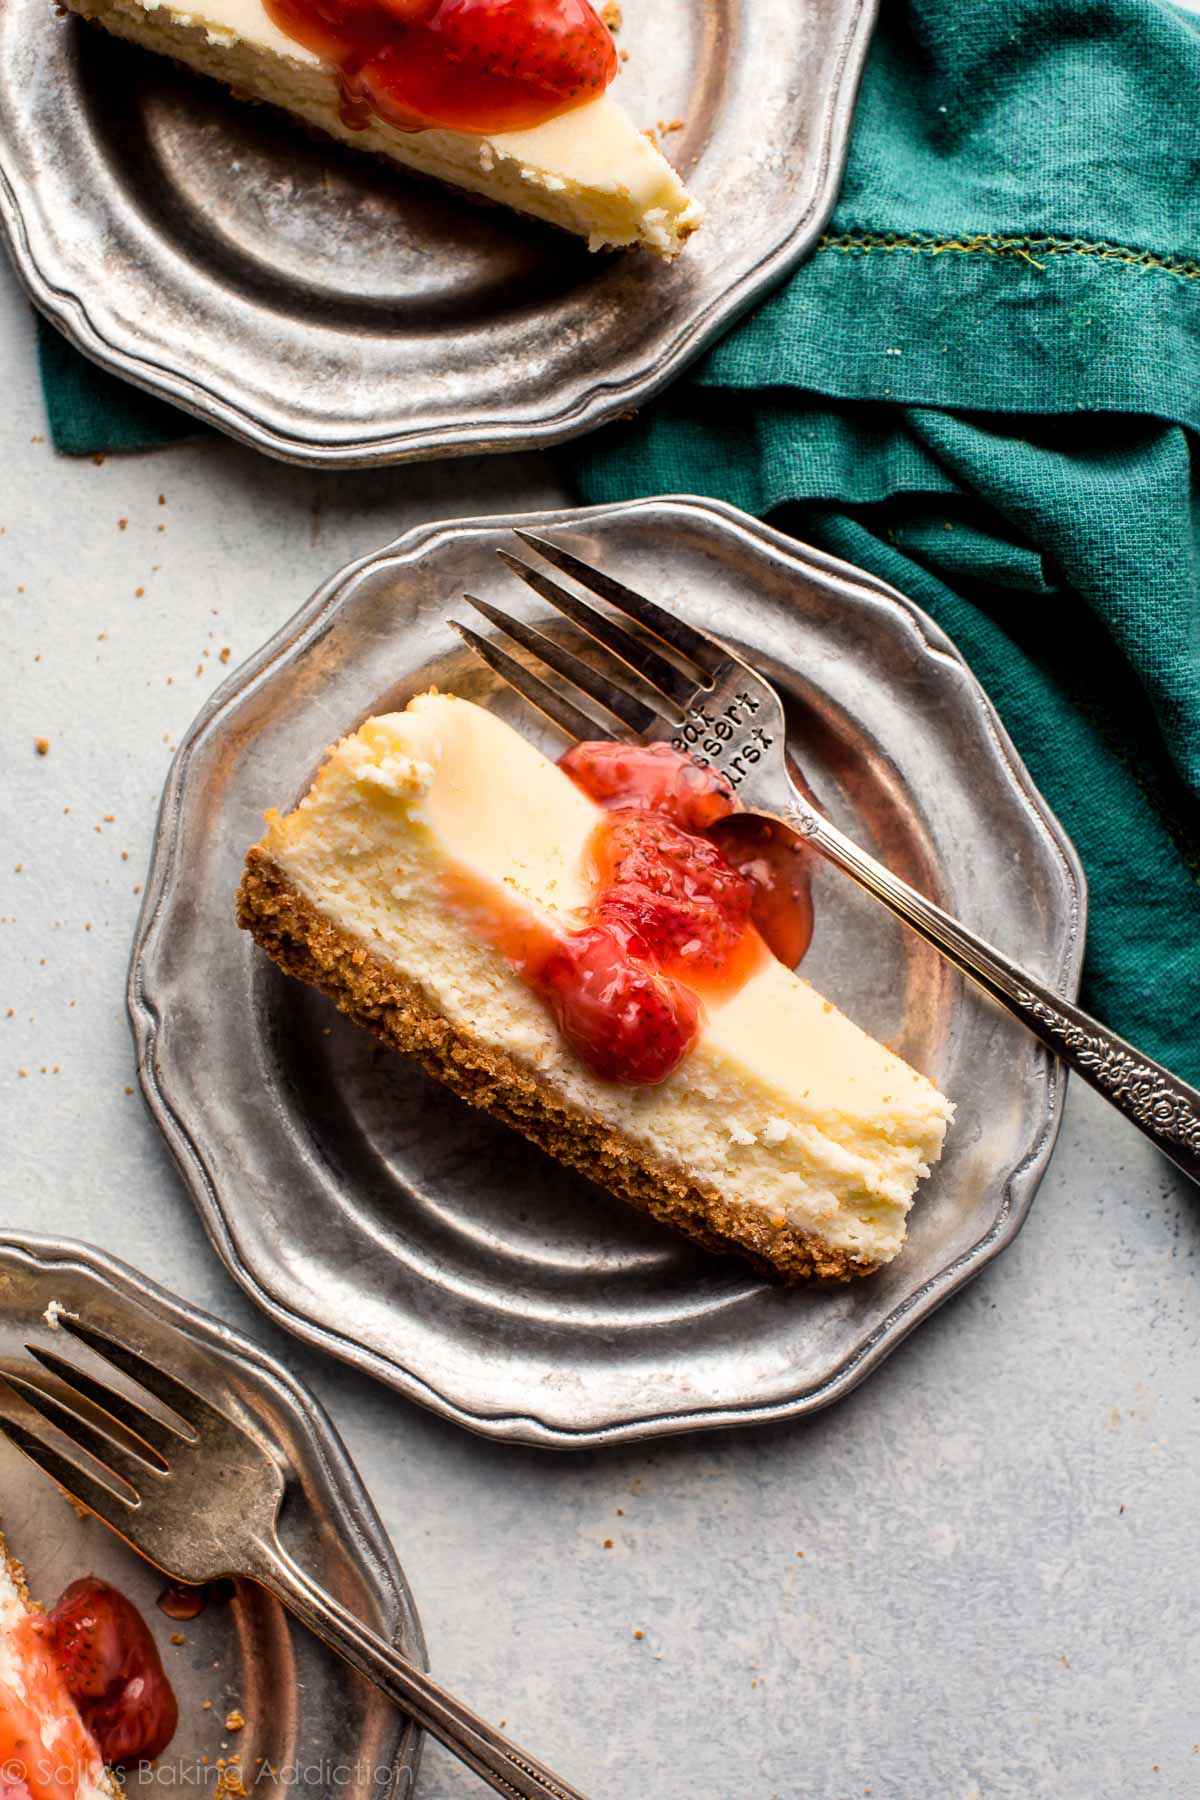 slices of cheesecake with strawberry topping on a silver plates with a fork